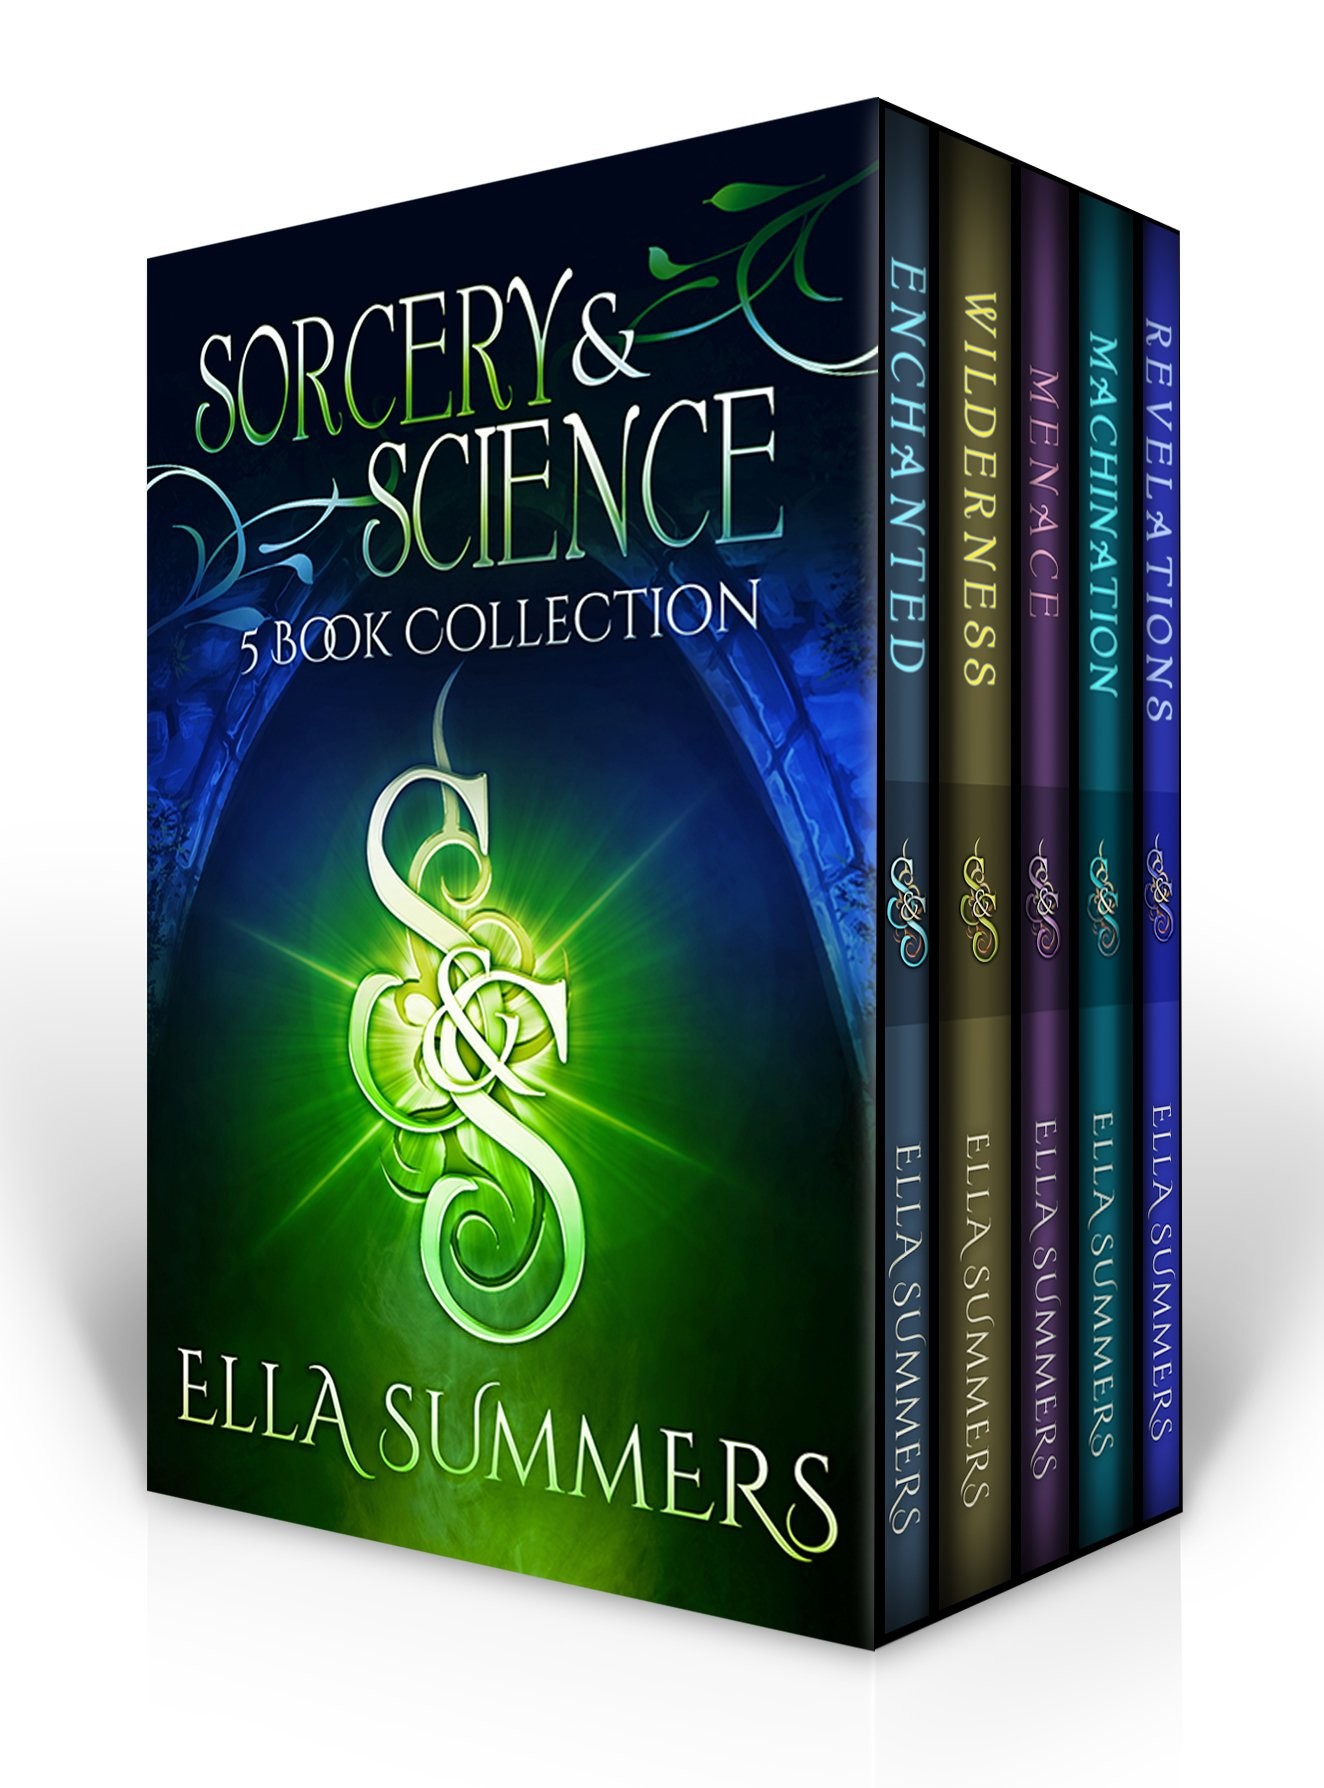 Sorcery & Science: 5 Book Collection (Sorcery and Science)